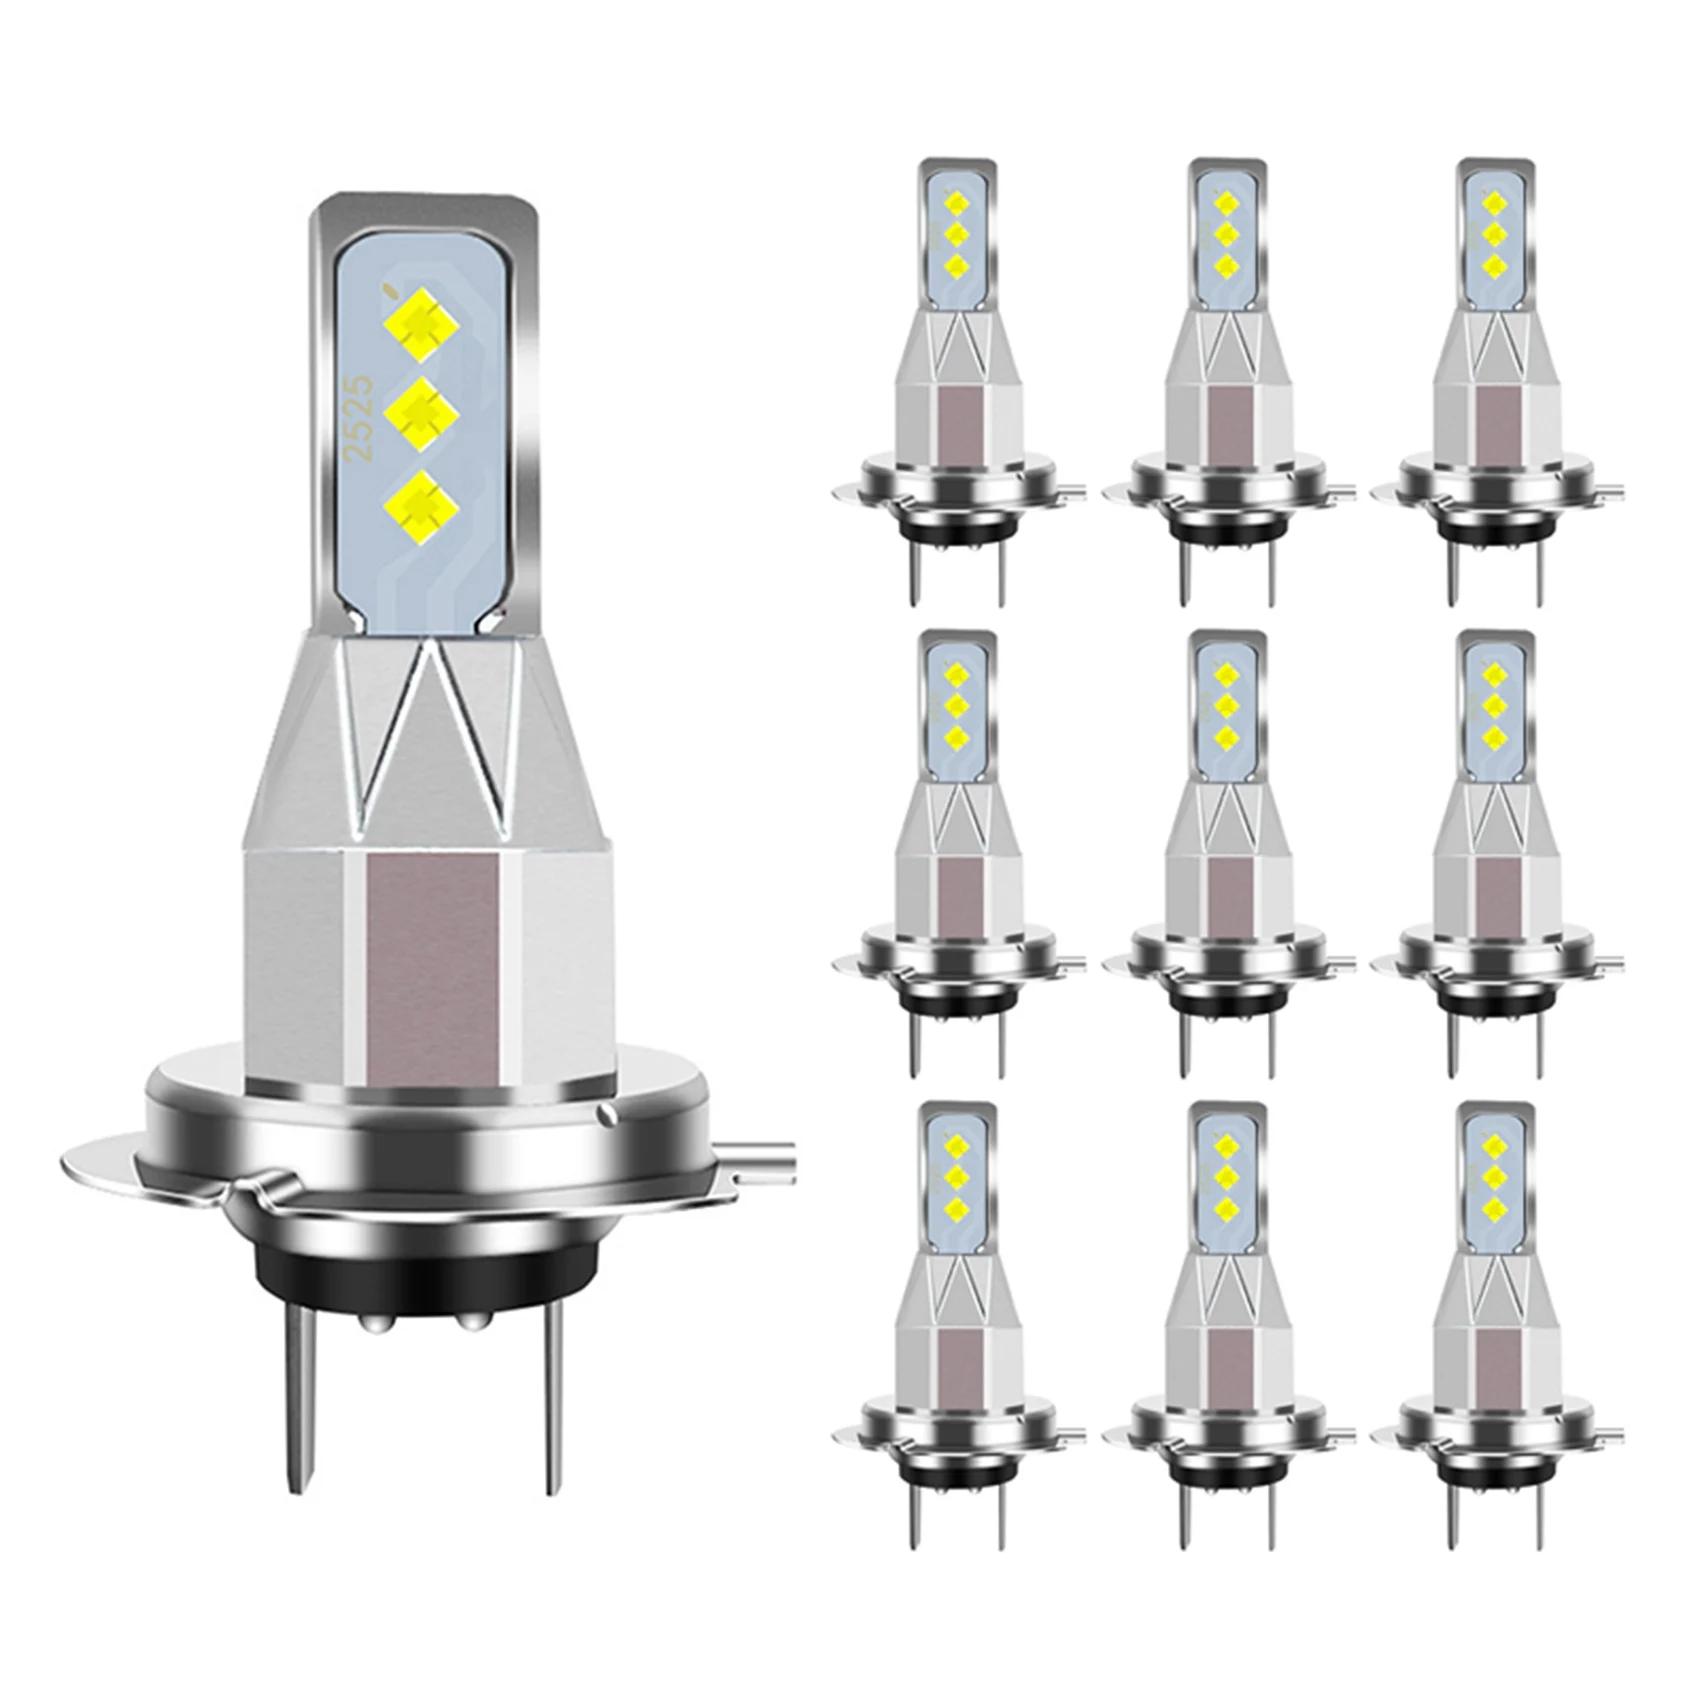 ̴ CSP LED Ʈ , Cunbus ȭƮ 6000K 6SMD , ڵ  Ʈ, Ȱ,  õ, H7, 20000LM, 10 